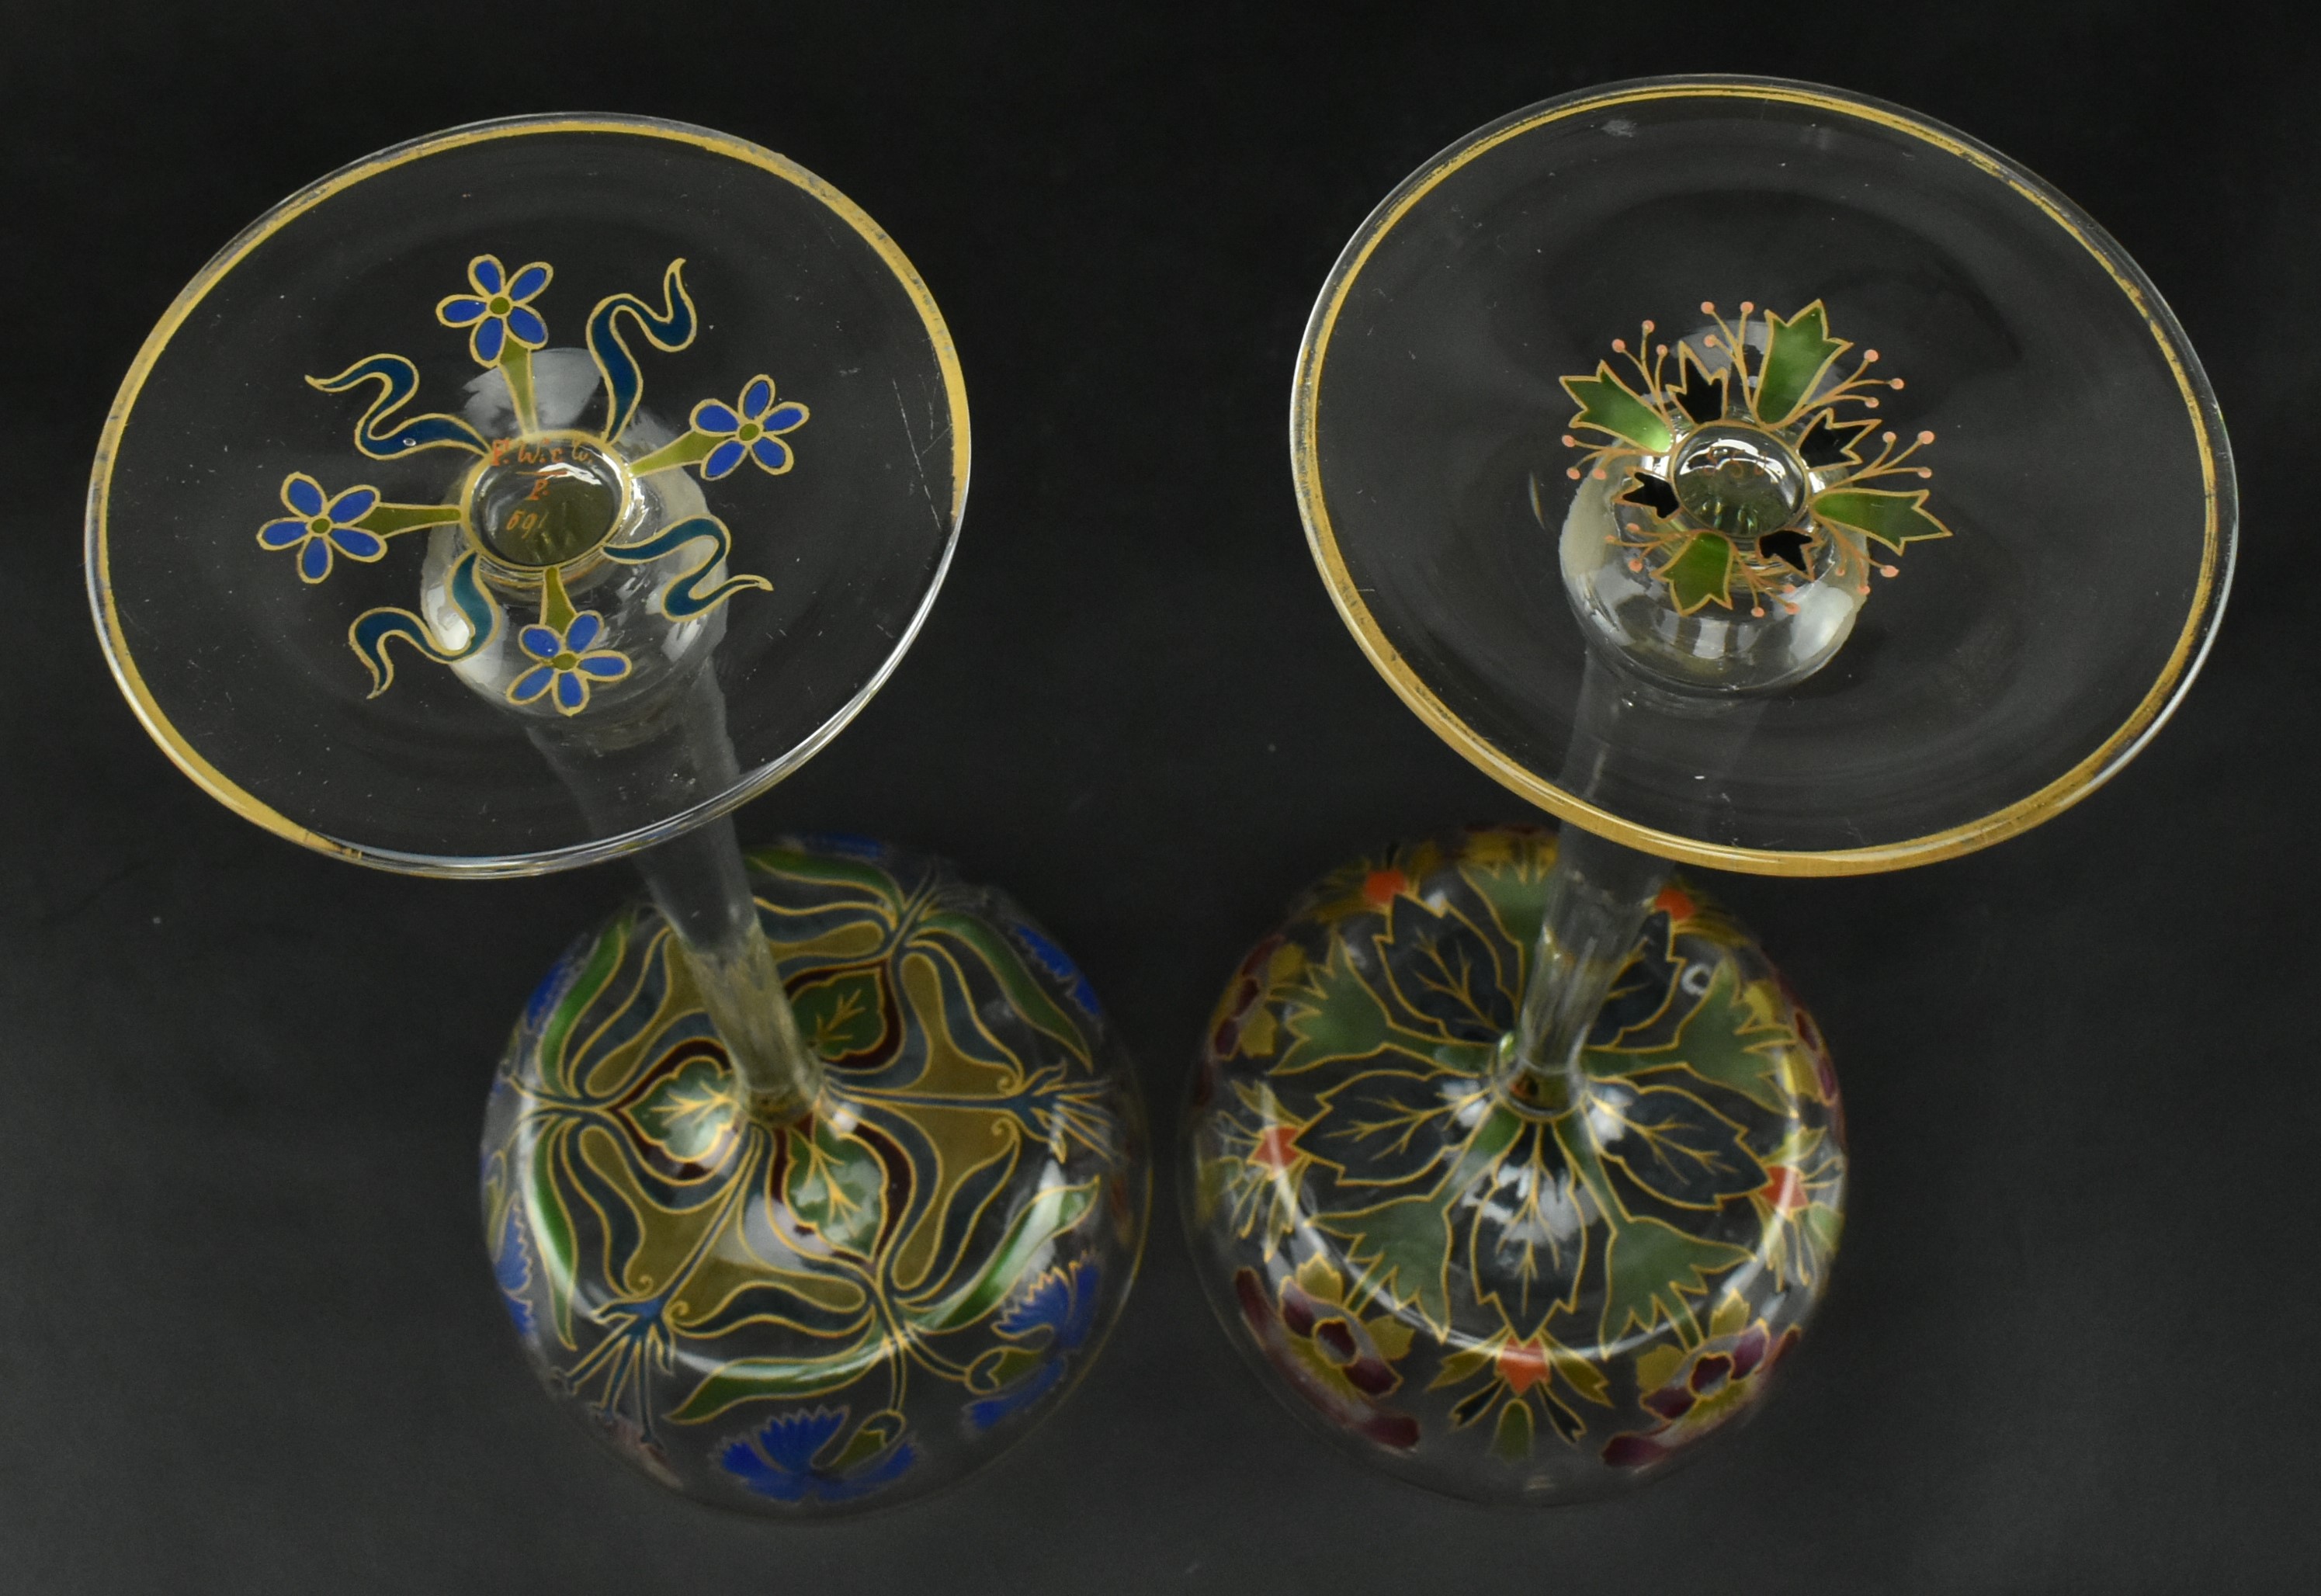 THERESIENTHAL - SIX ART NOUVEAU CRYSTAL CHAMPAGNE GLASSES - Image 7 of 8